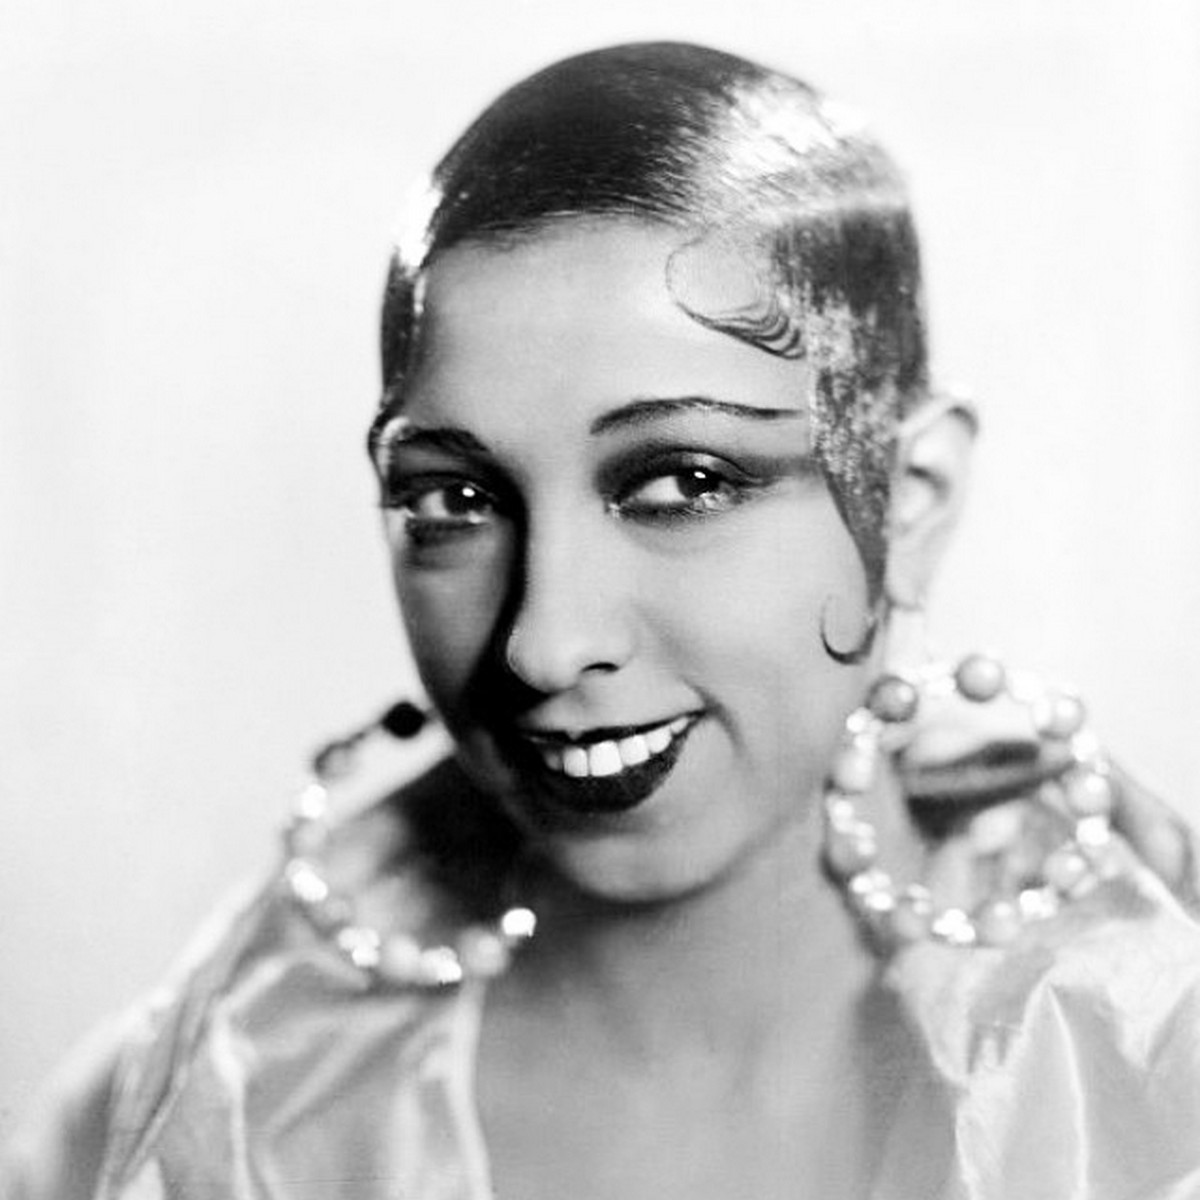 Josephine Baker with edges hair in the 1920s